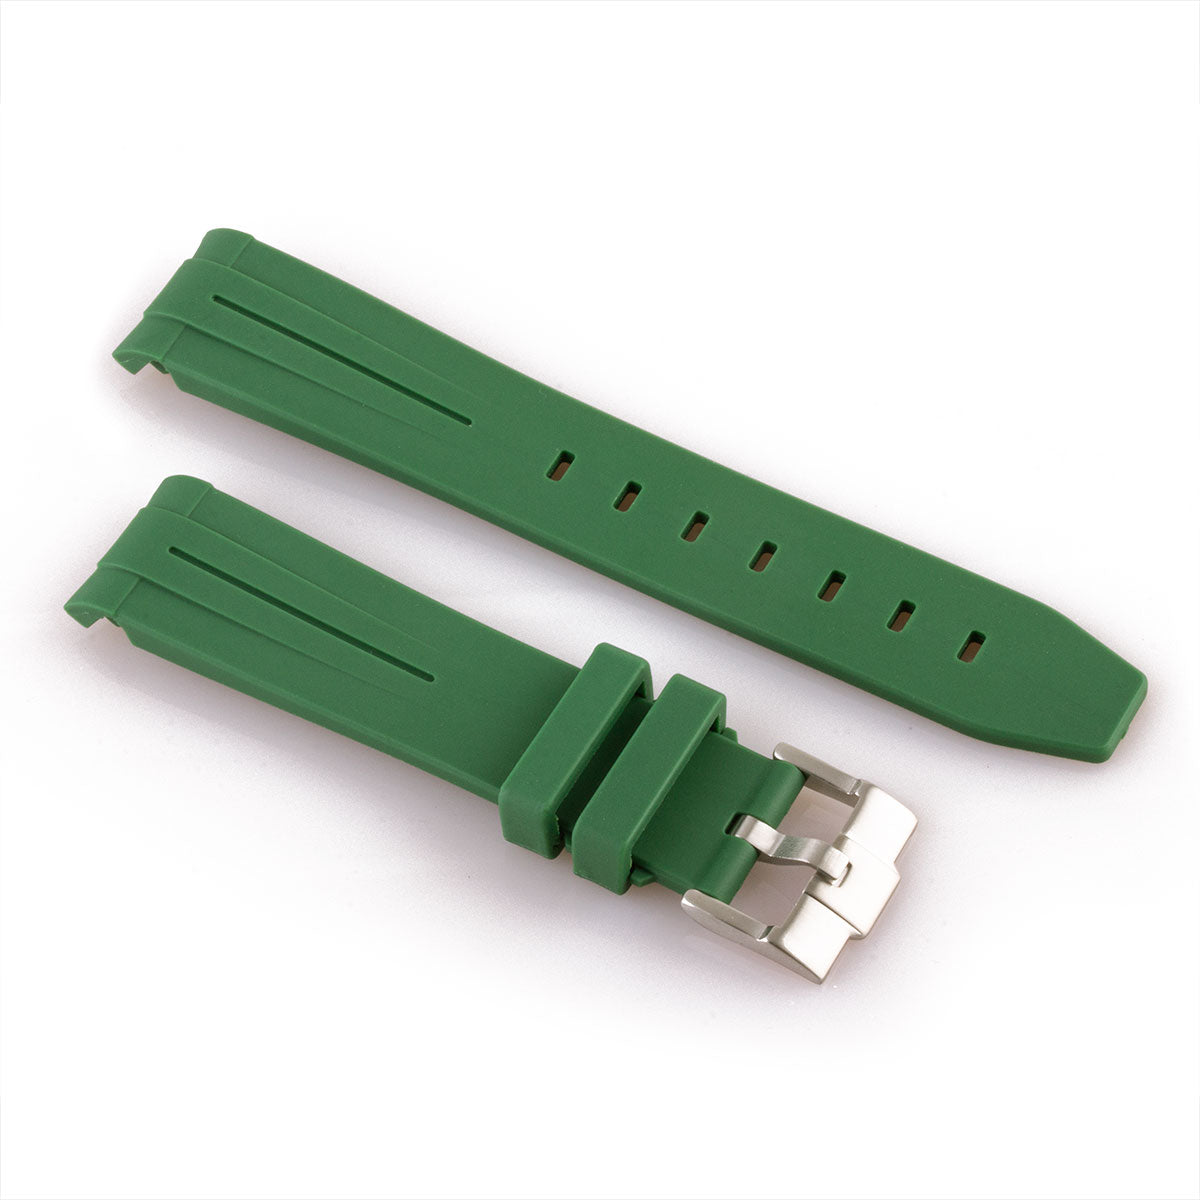 ​Rolex - FKM Rubber integrated watch band with tang buckle (black, blue, green, brown...)